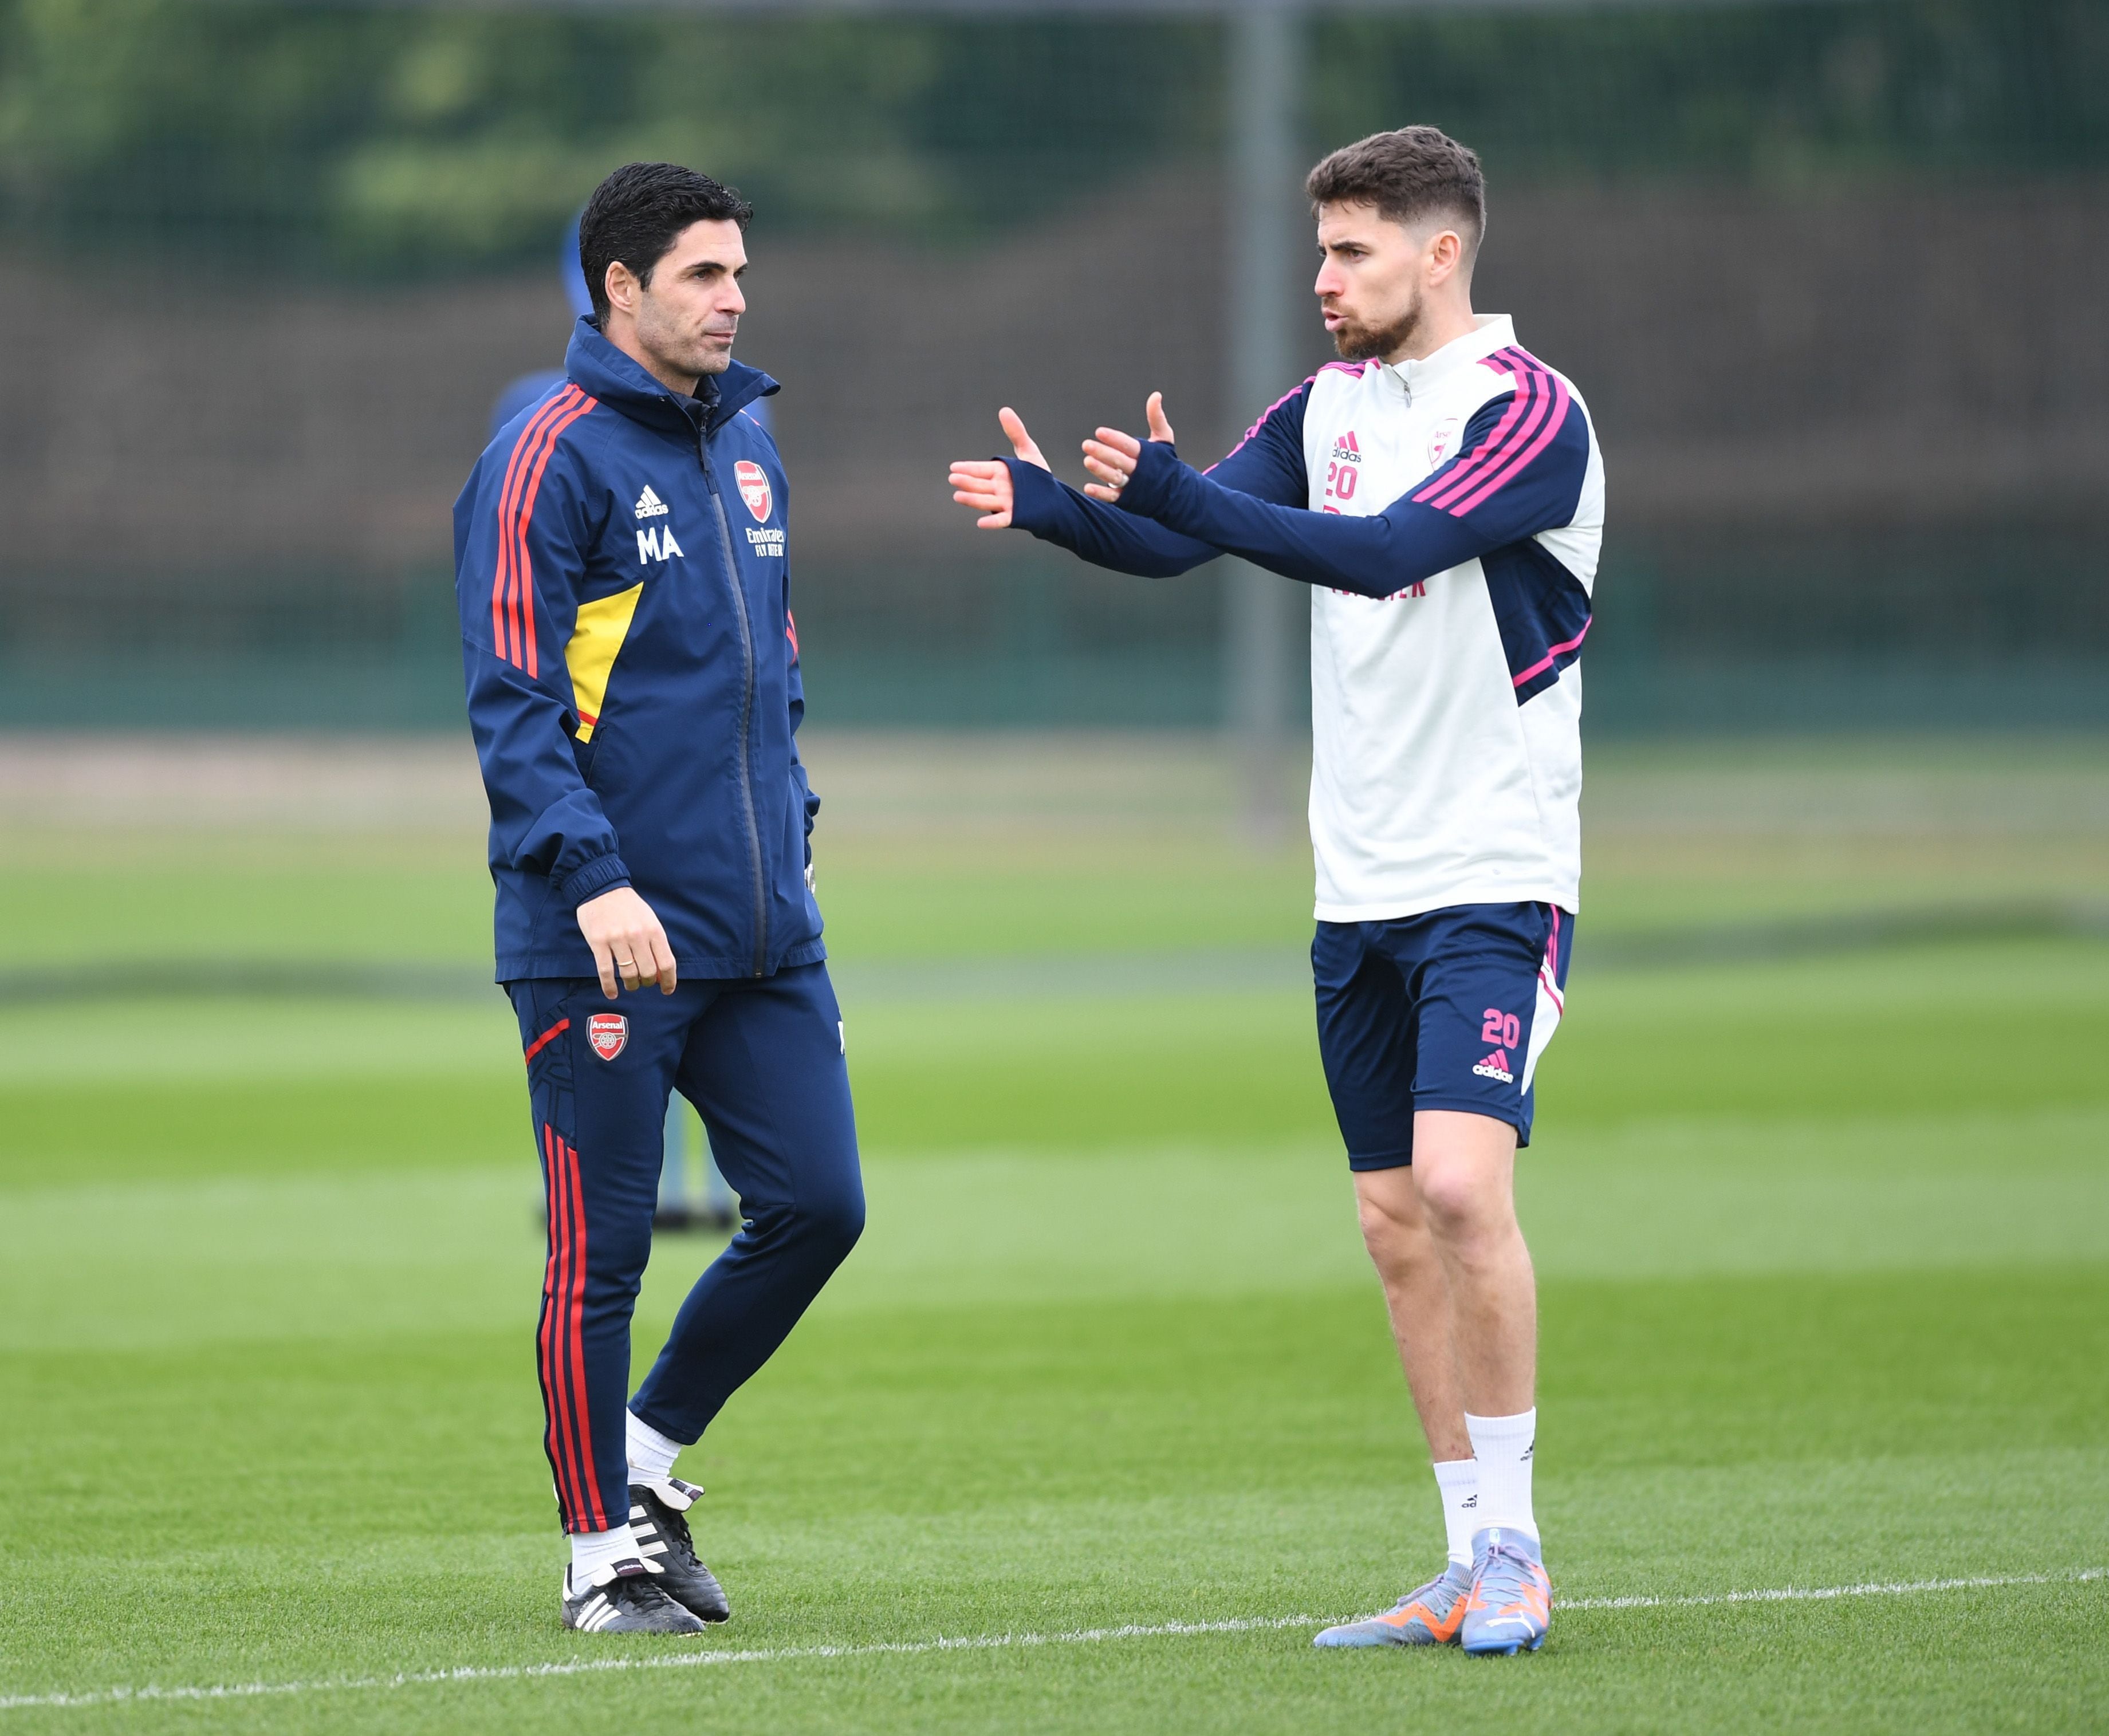 ST ALBANS, ENGLAND - FEBRUARY 17: Arsenal manager Mikel Arteta talks to Jorginho during a training session at London Colney on February 17, 2023 in St Albans, England. (Photo by Stuart MacFarlane/Arsenal FC via Getty Images)